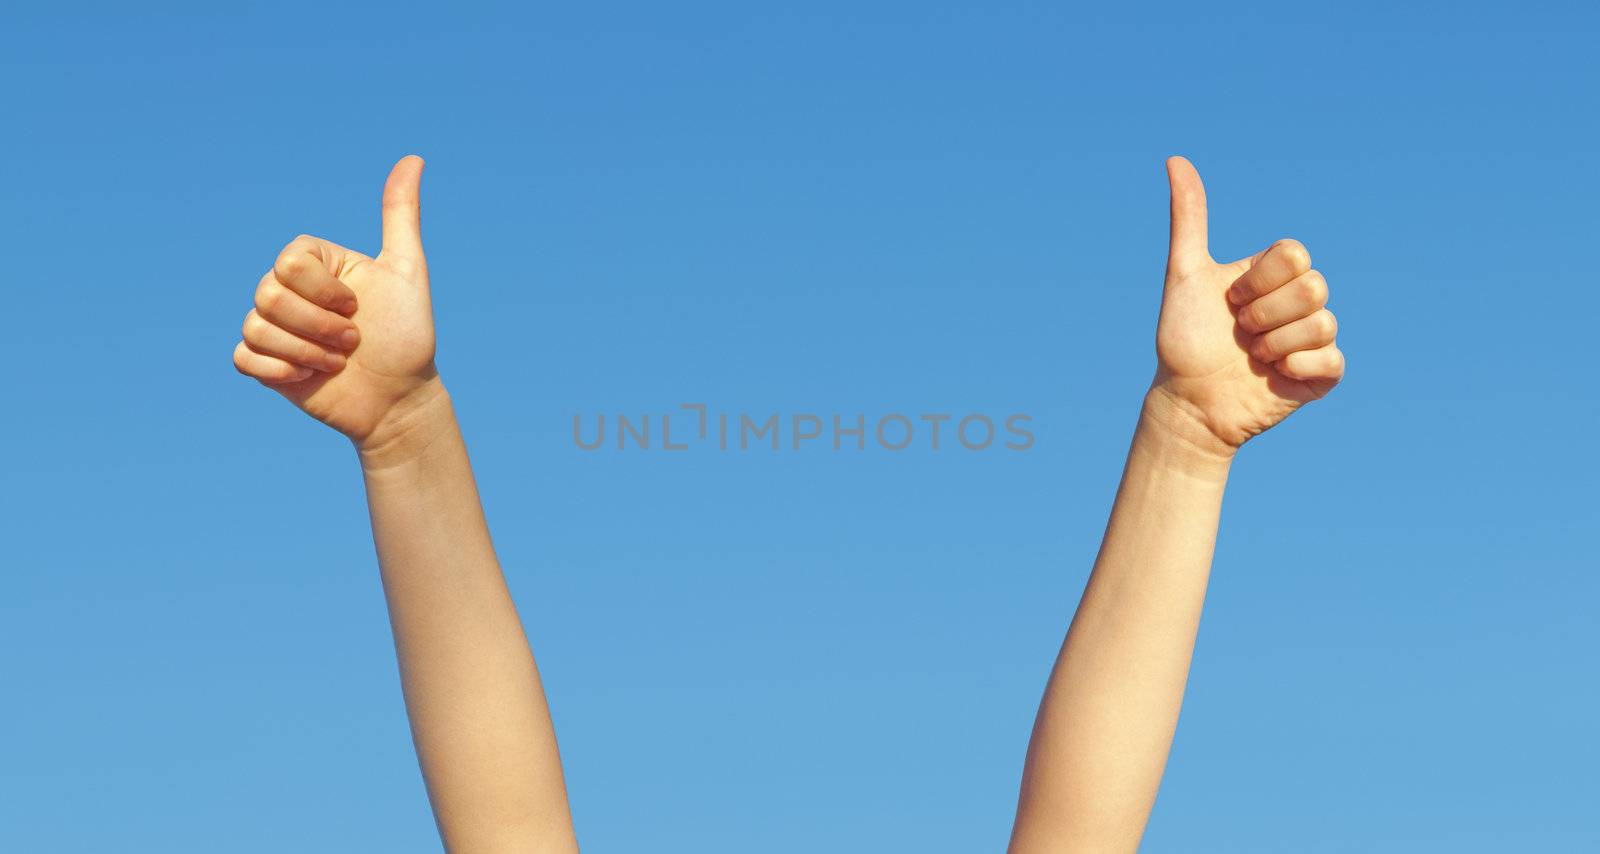 A photography of two hands thumbs up